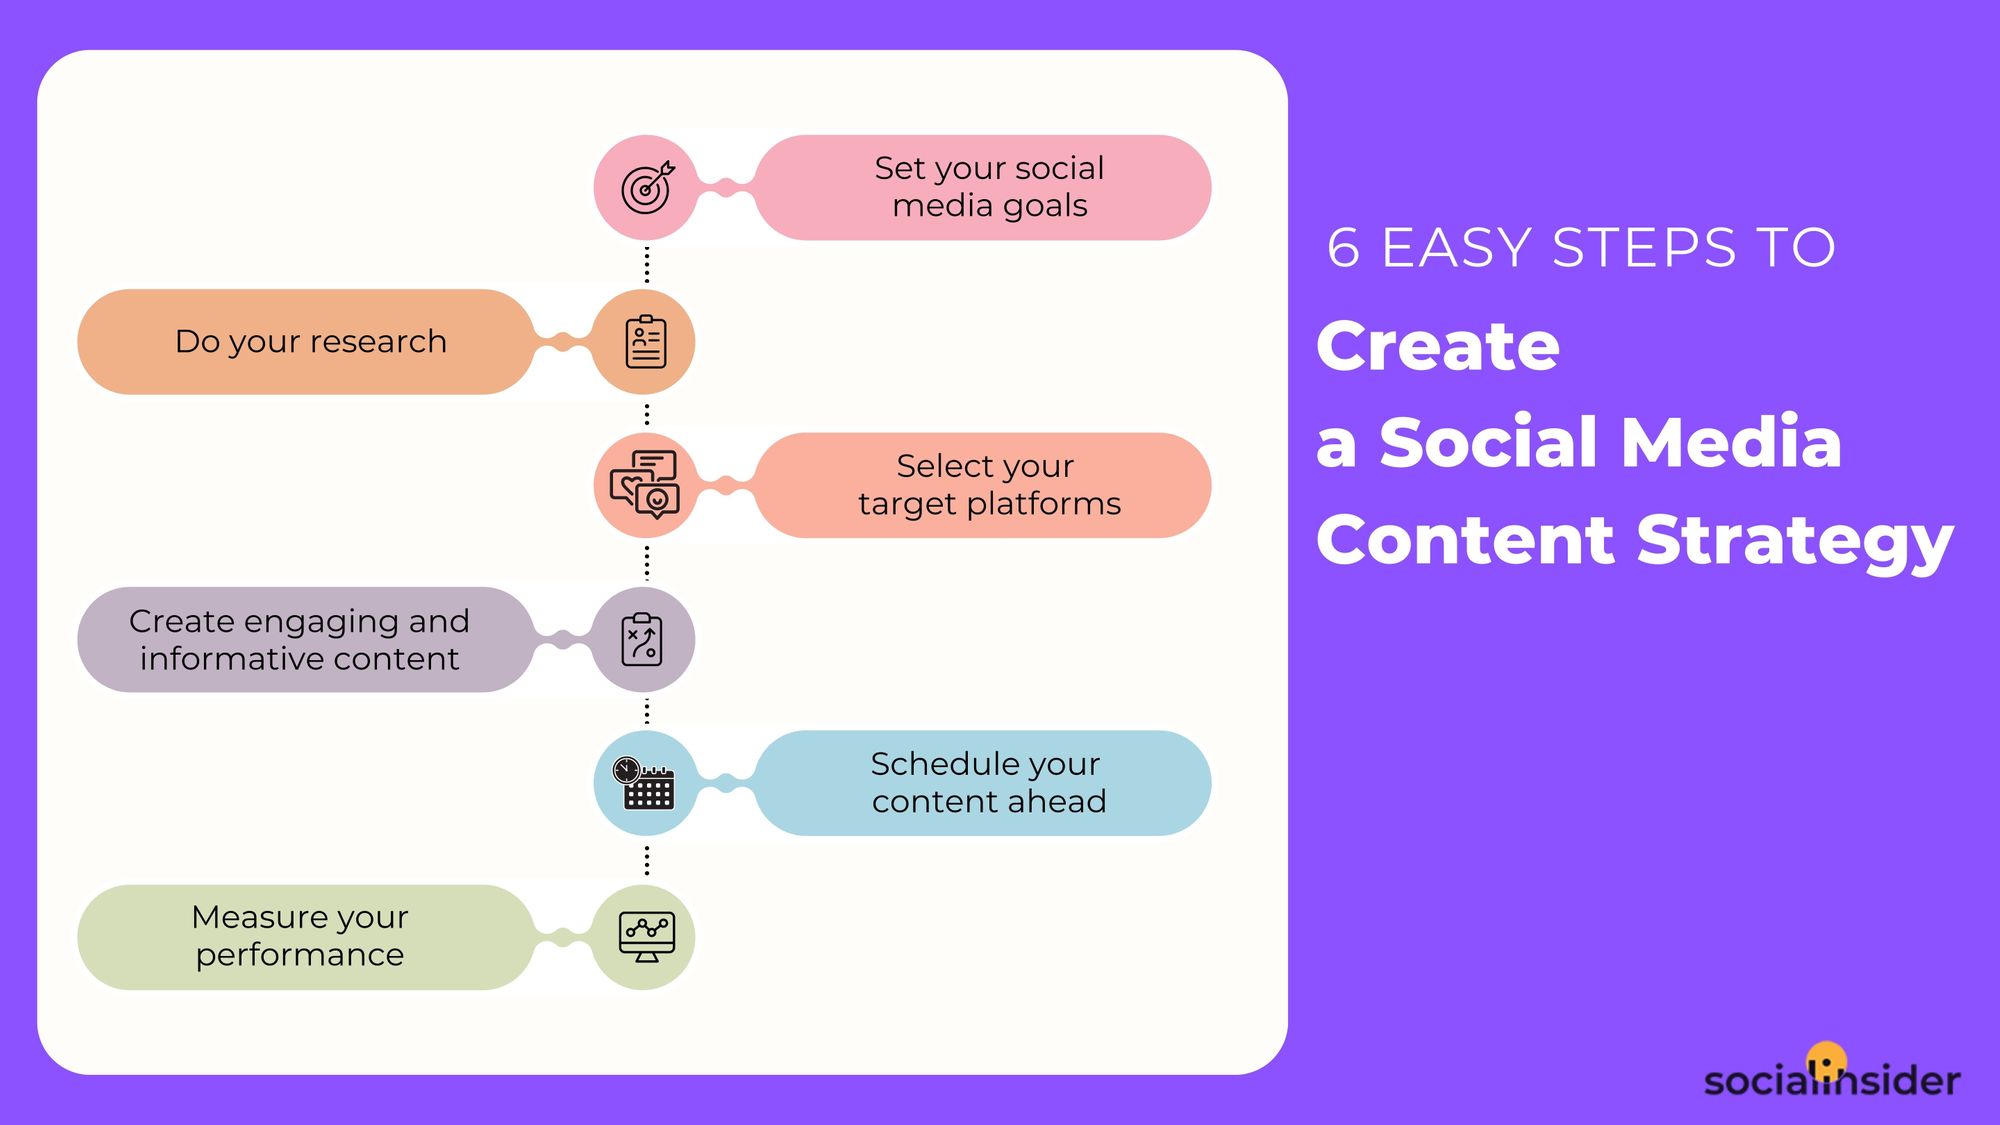 how to create a social media content strategy in 6 easy steps